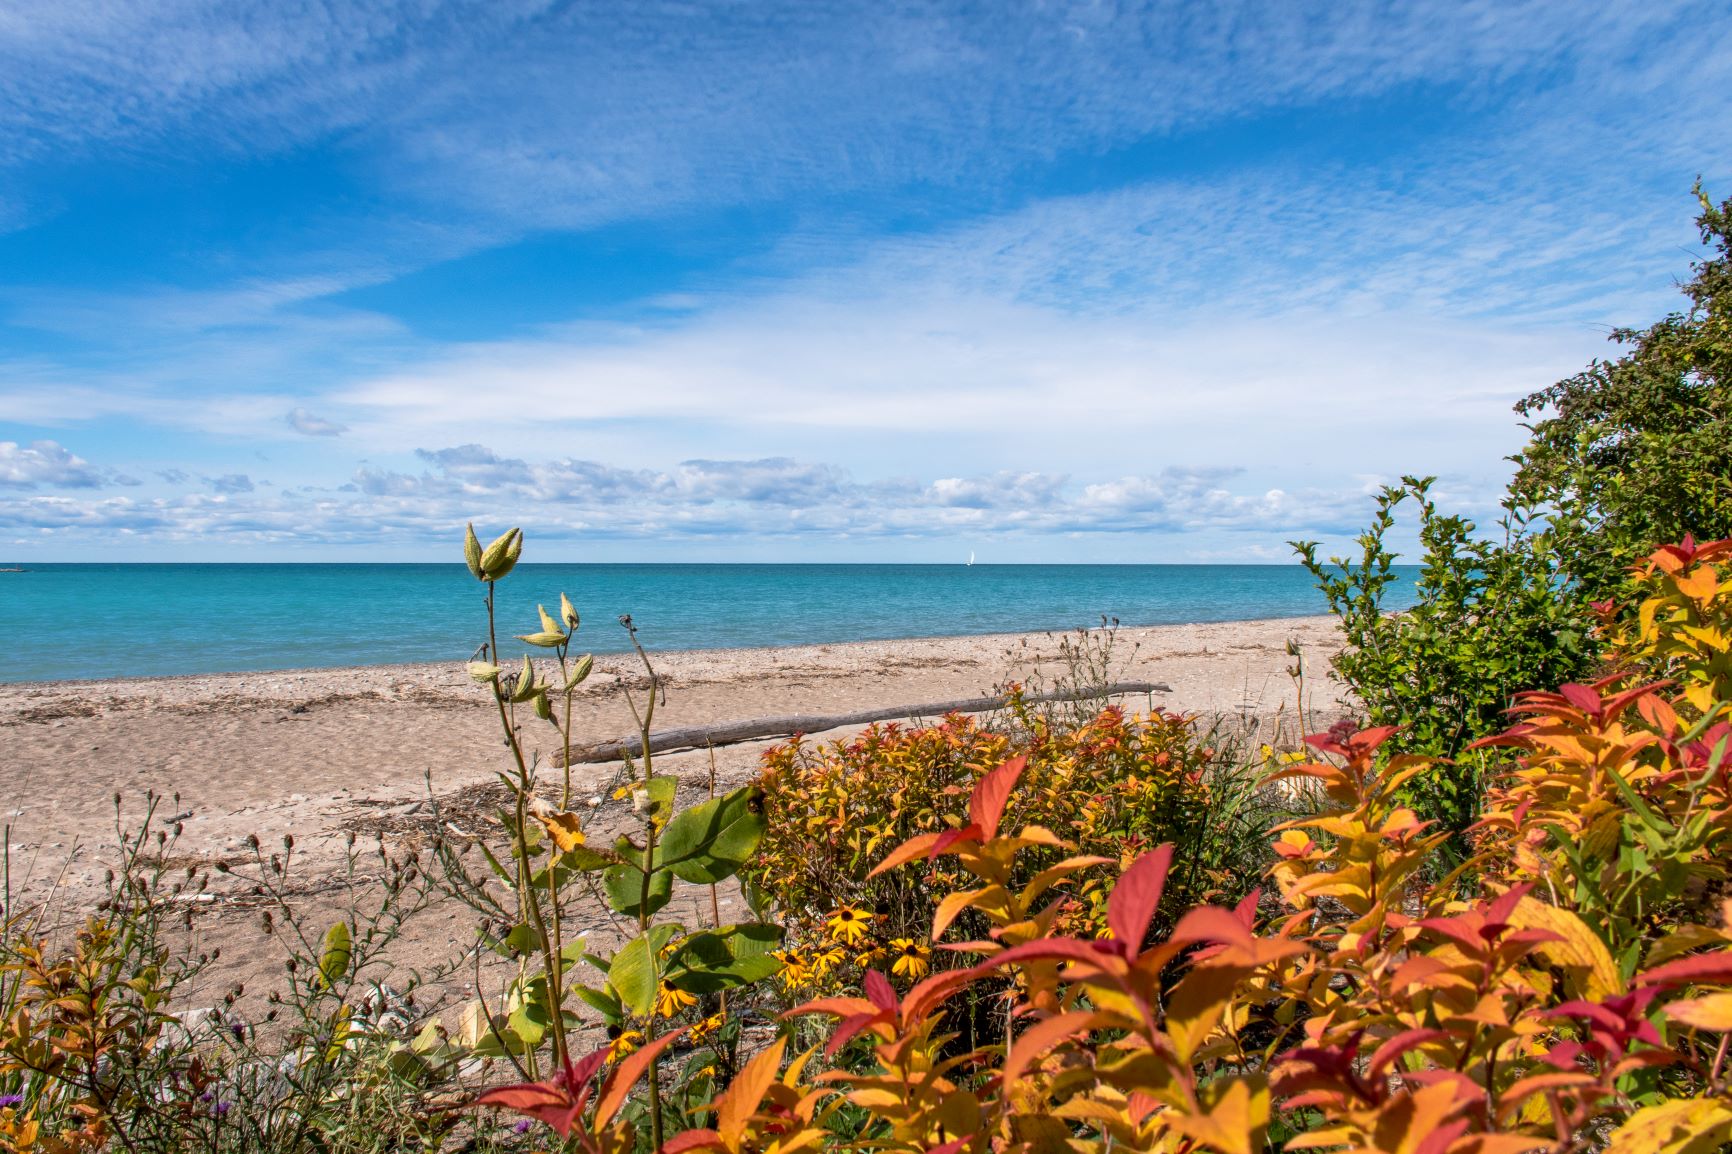 Cottage rentals in Ontario's West Coast is from Grand Bend to Bayfield to Goderich. Check out this list of the best Airbnb properties.